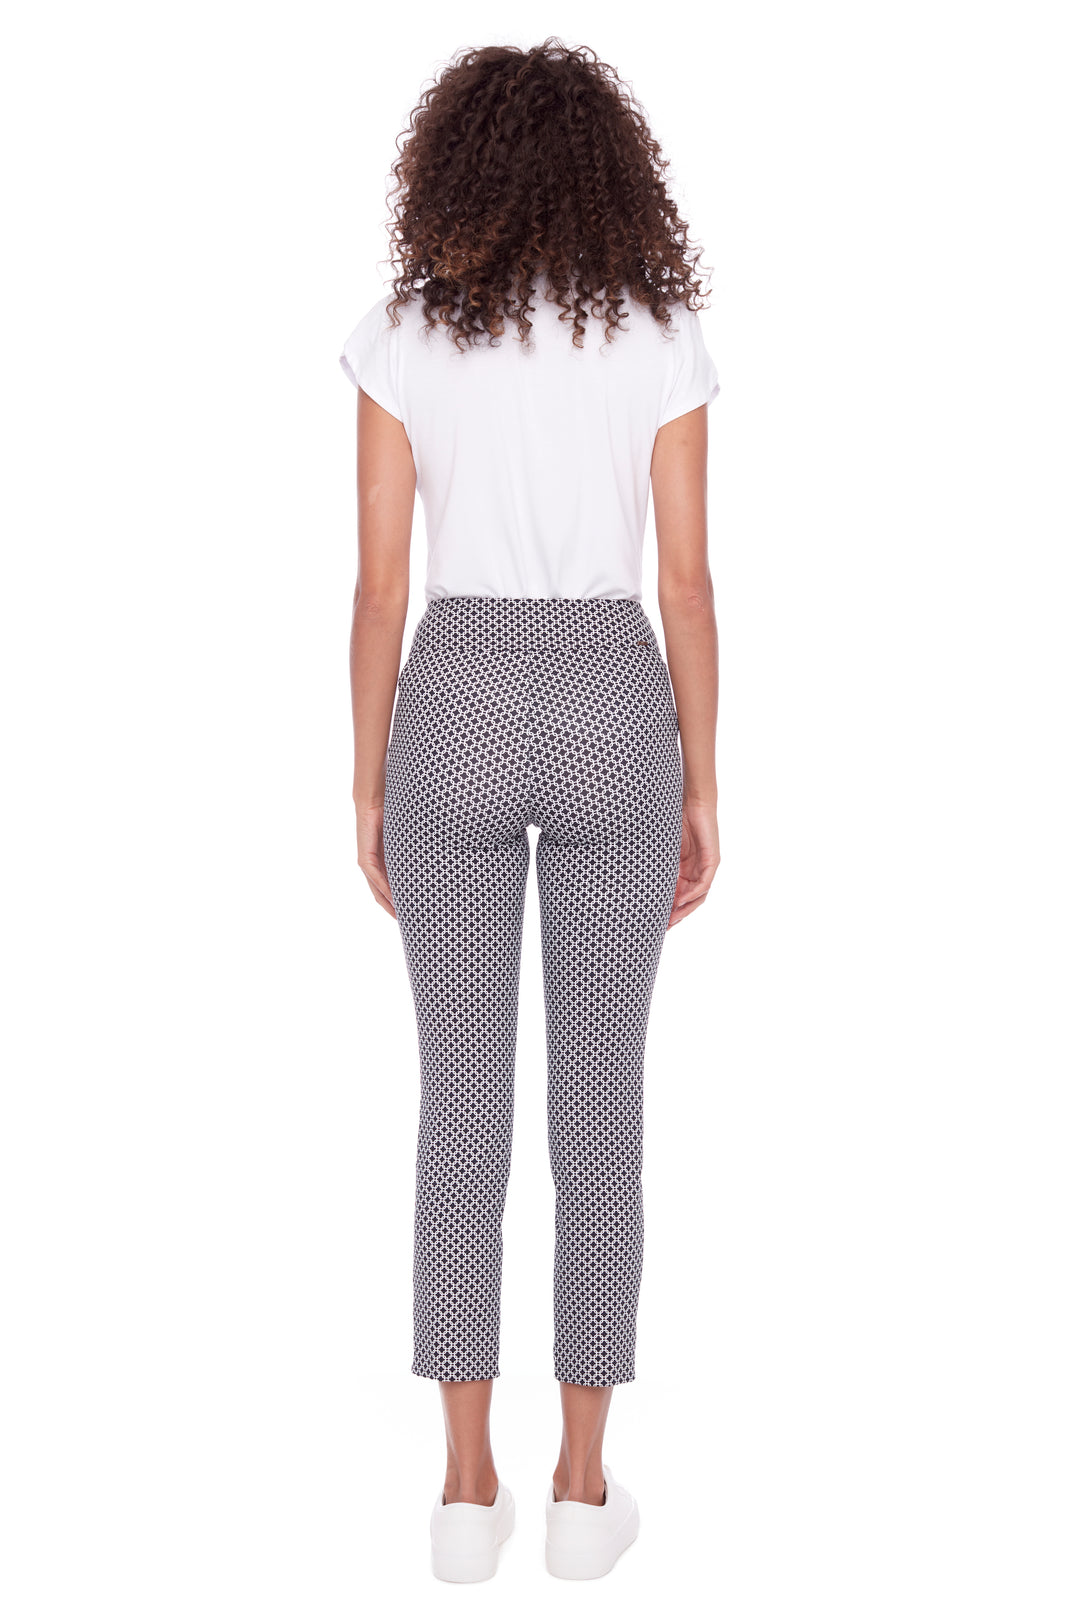 UP! Womens Pant 68106 – TYH Boutique